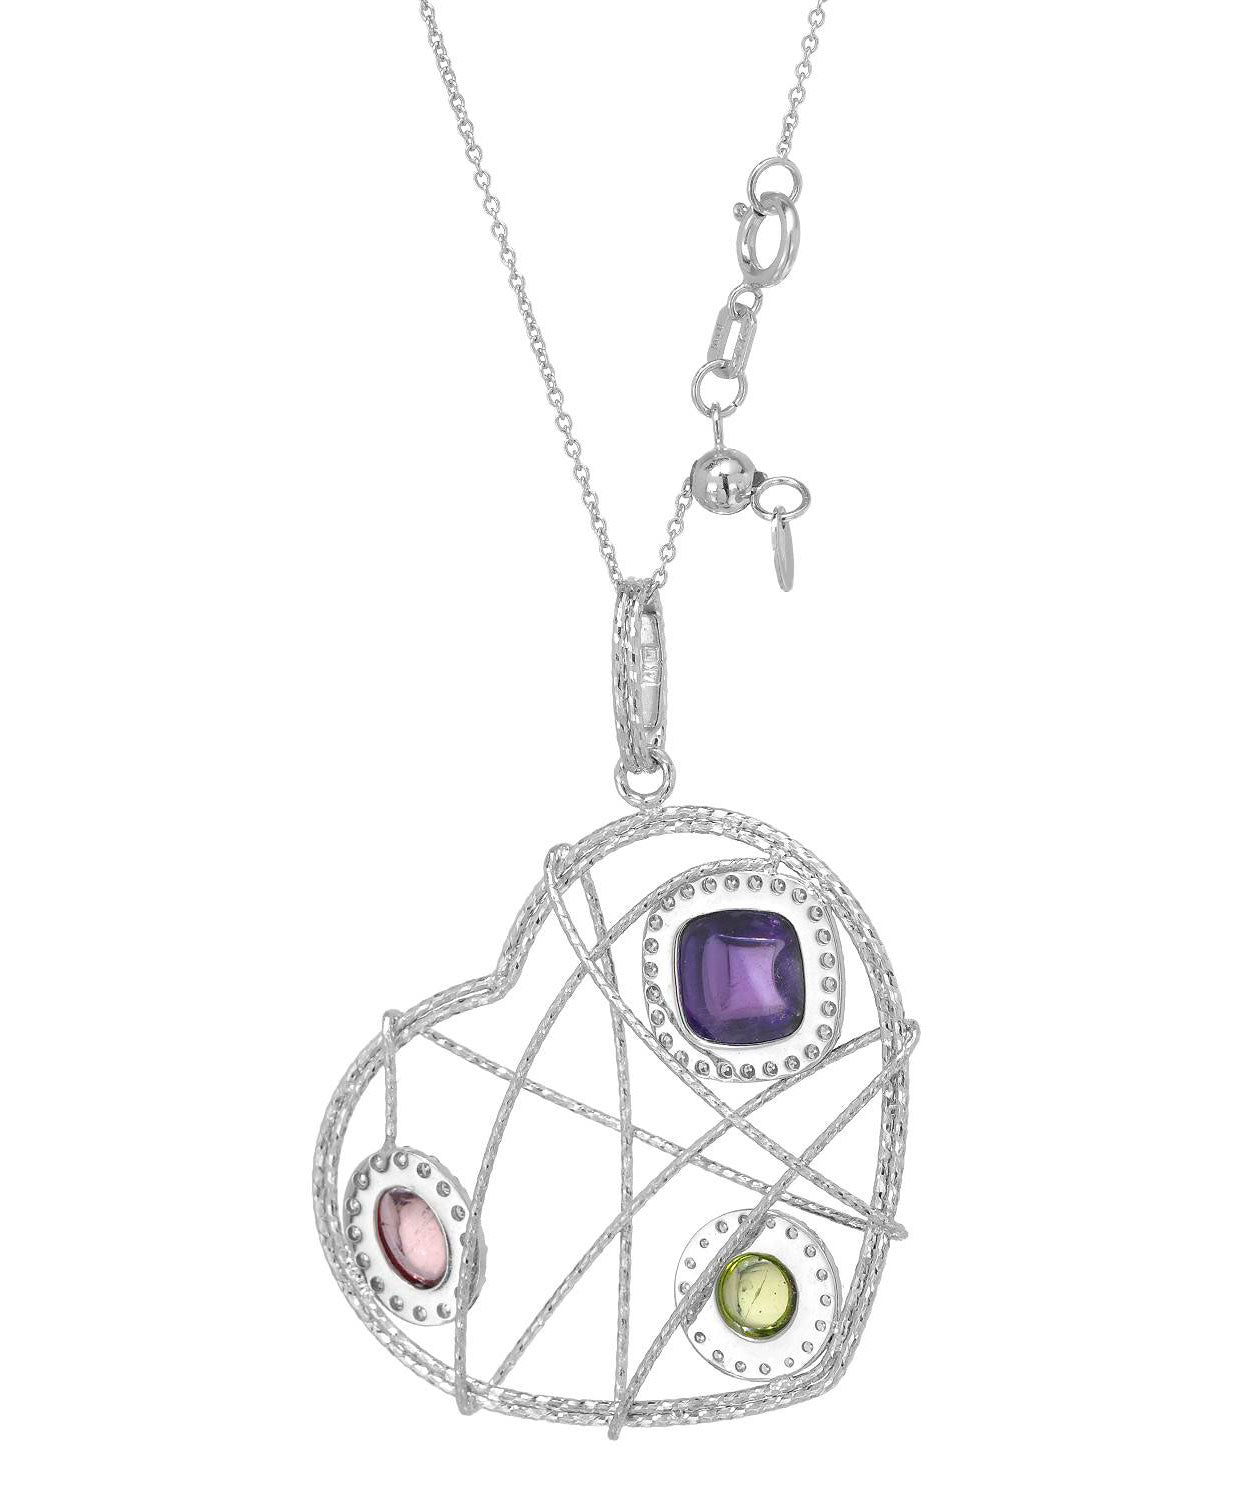 Abstract Collection 3.30ctw Natural Amethyst, Peridot, Tourmaline and Cubic Zirconia 14k Gold Heart Pendant With Chain - Made in Italy View 2